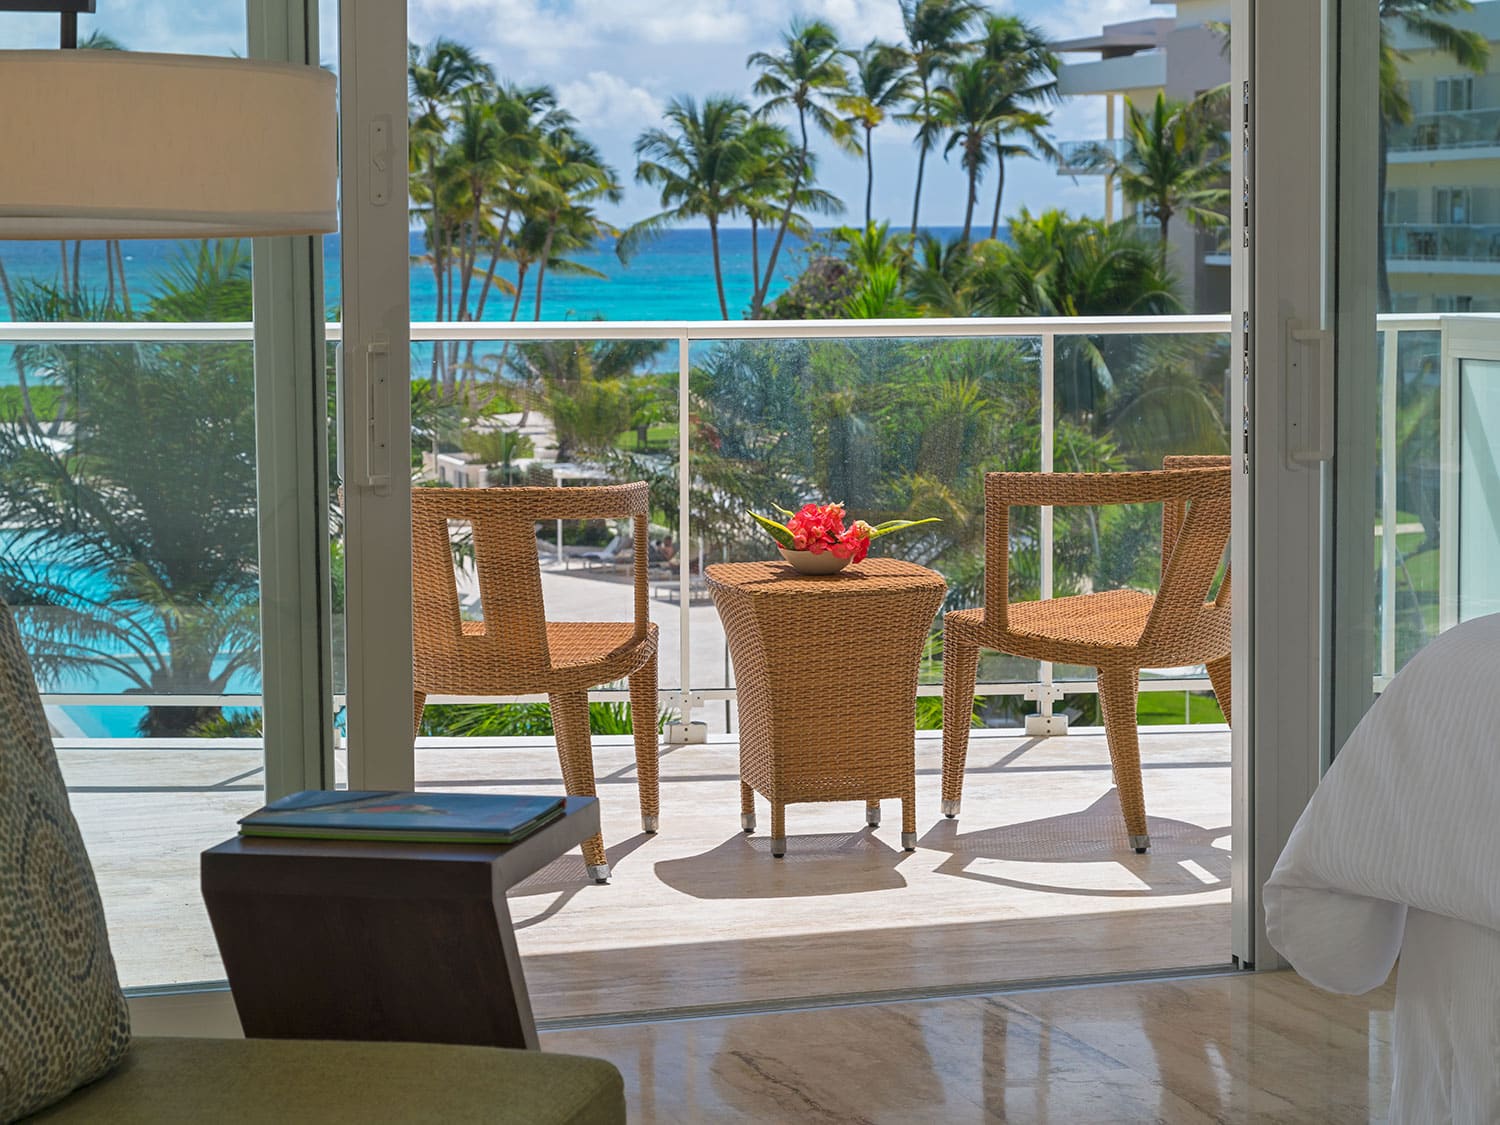 The view from the balcony of a traditional room at The Westin Puntacana Resort & Club in the Dominican Republic.